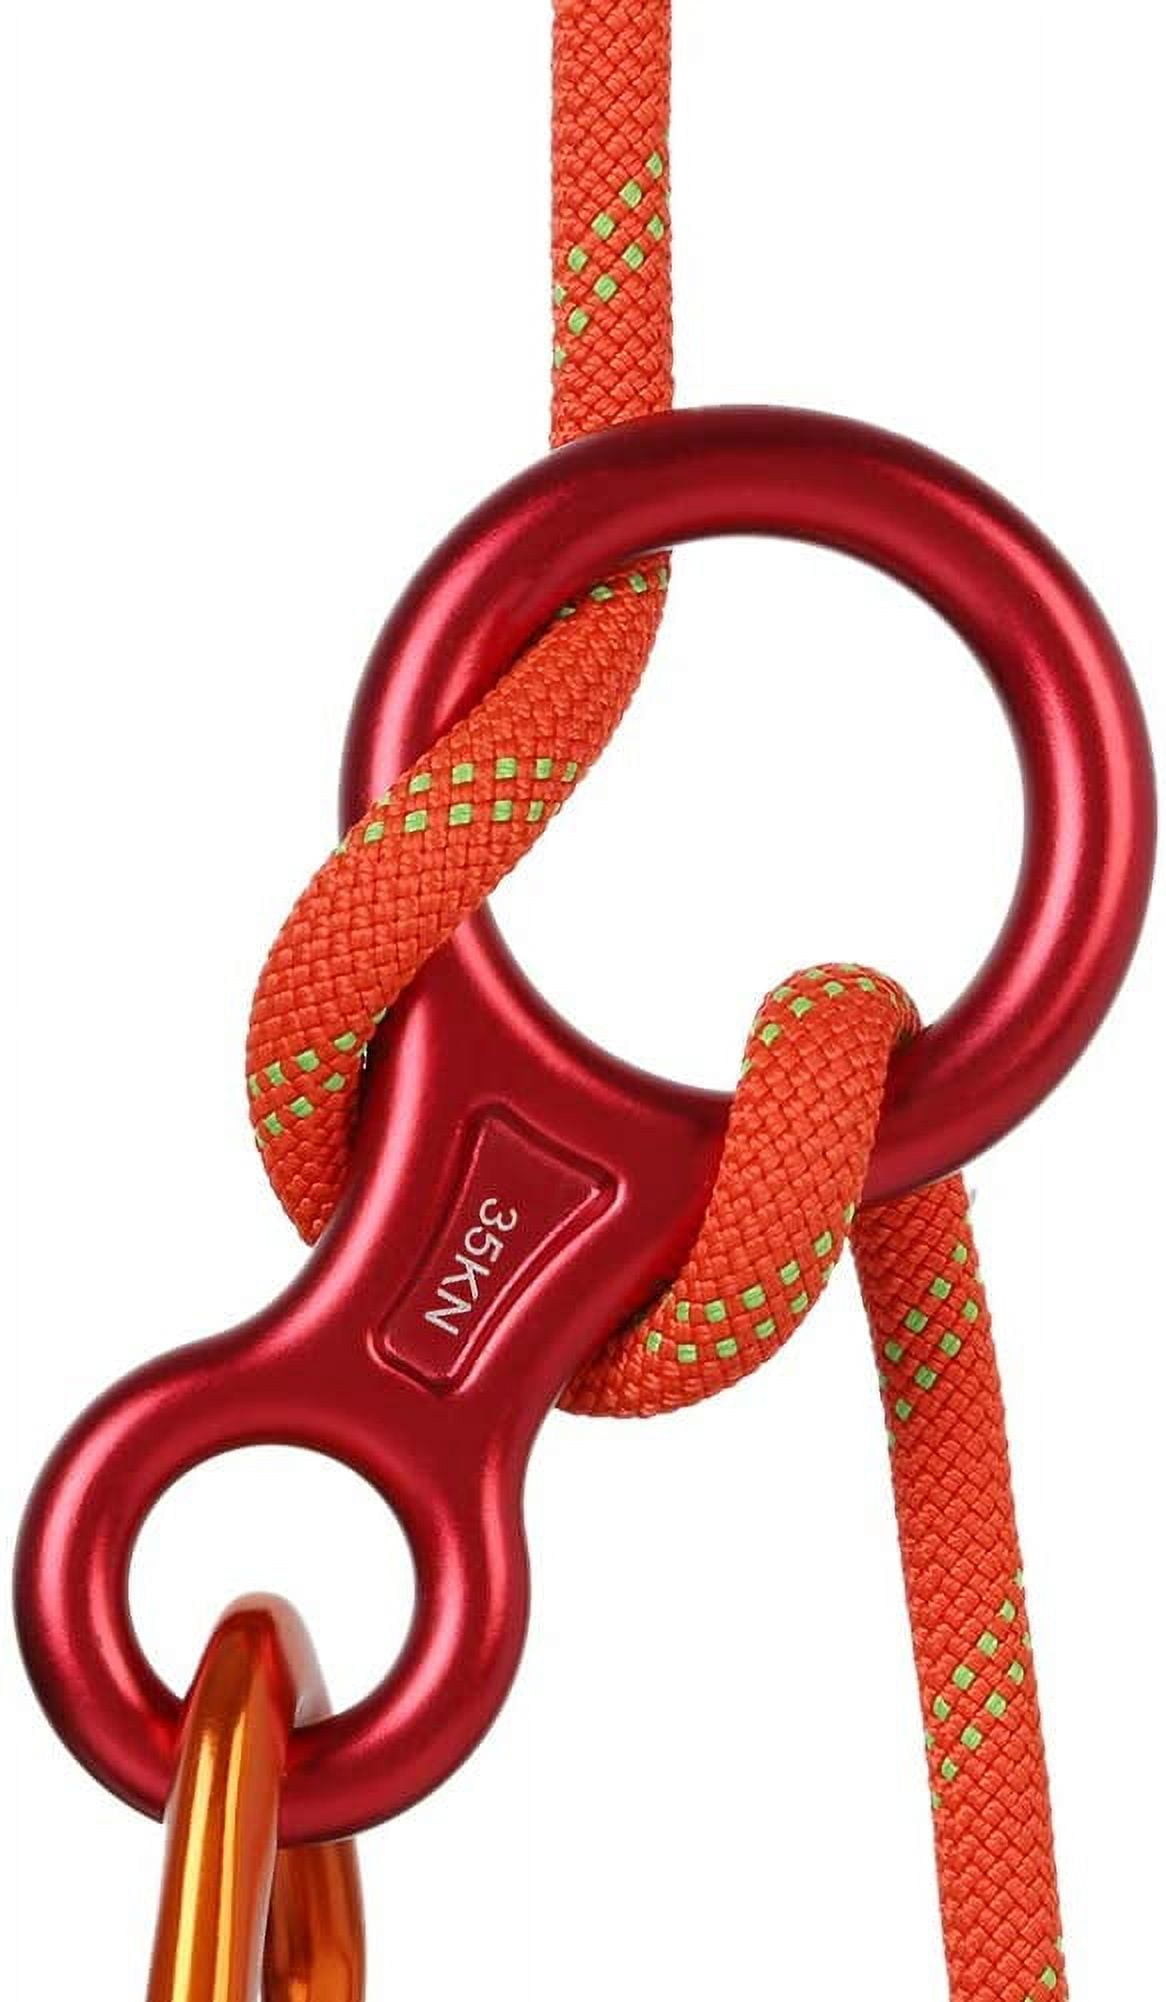 35 KN Climbing Rescue Figure 8 Descender Rigging Plate Heavy Duty & Large &  High Strength Rappel Device Equipment for Rappelling, Belaying, Tree  Climbing, Aerial Silks Rigging, Red 